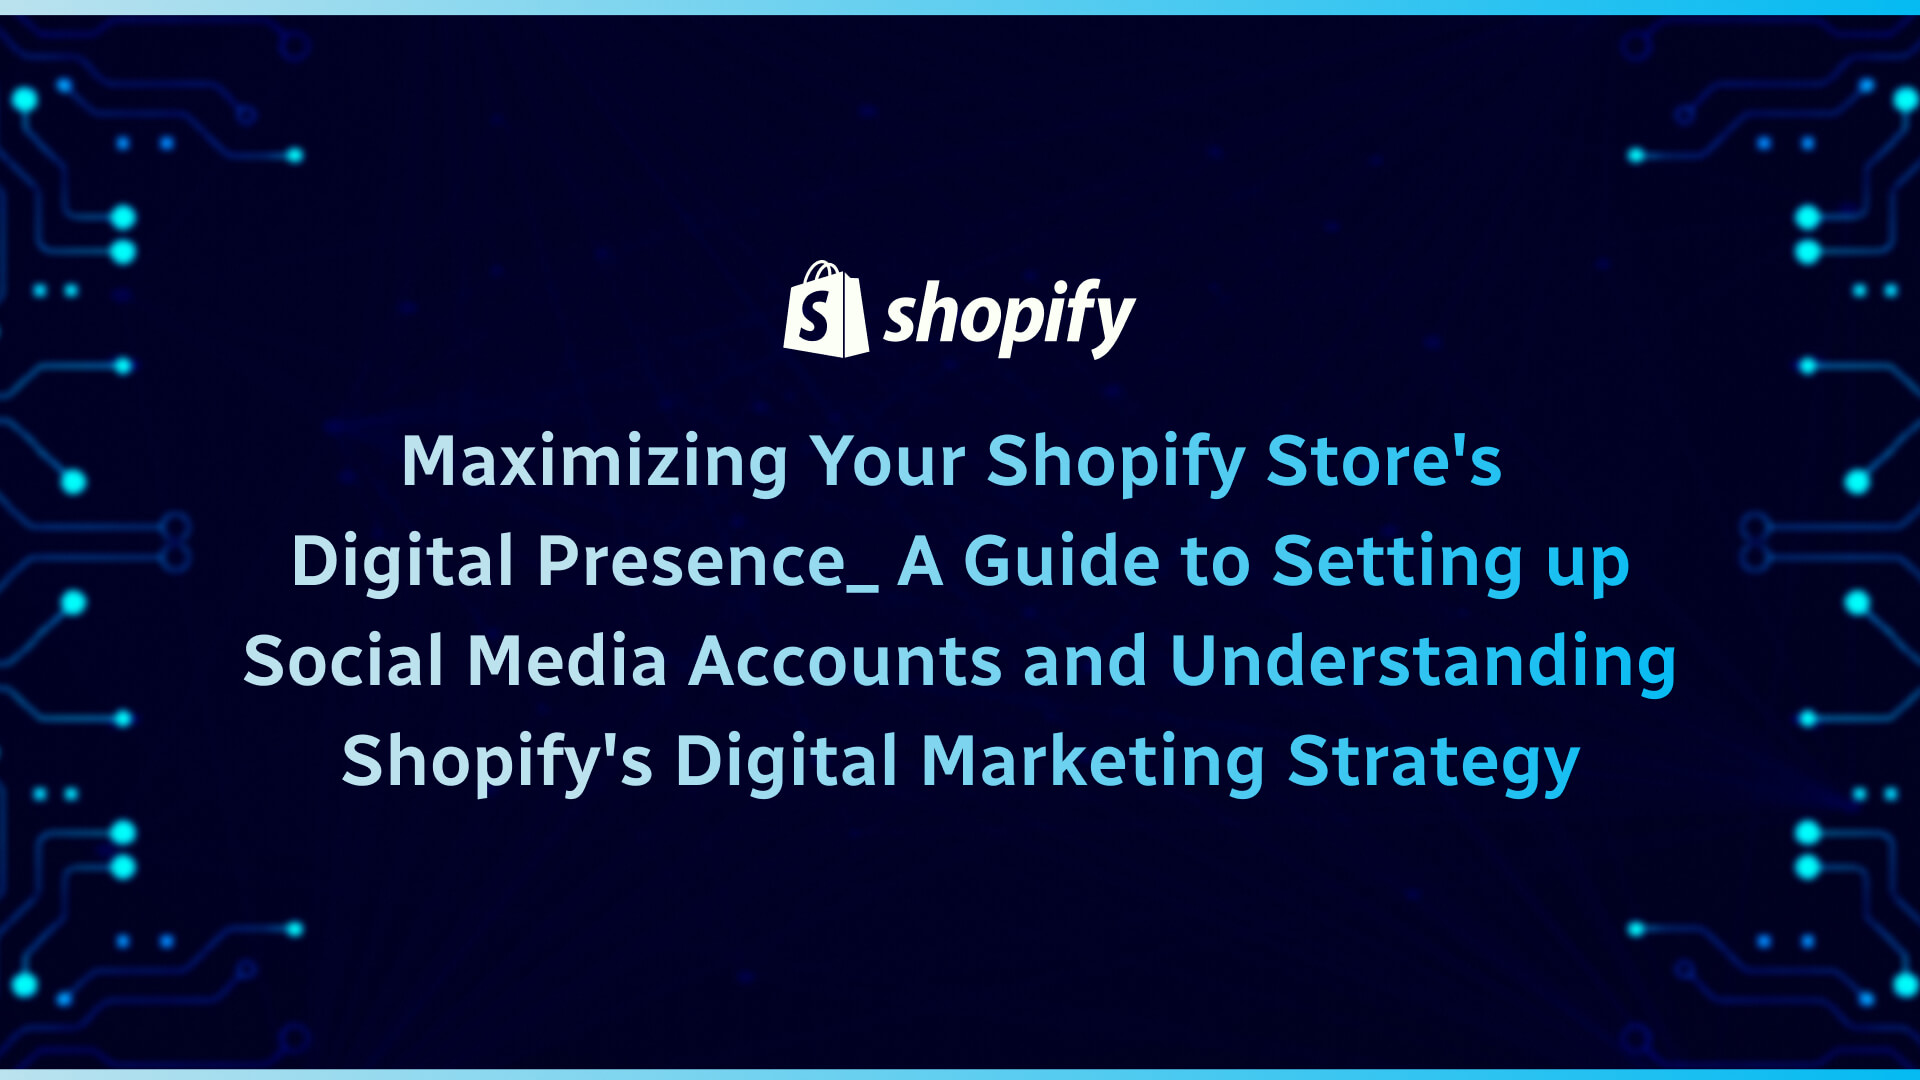 Maximizing Your Shopify Store's Digital Presence_ A Guide to Setting up Social Media Accounts and Understanding Shopify's Digital Marketing Strategy